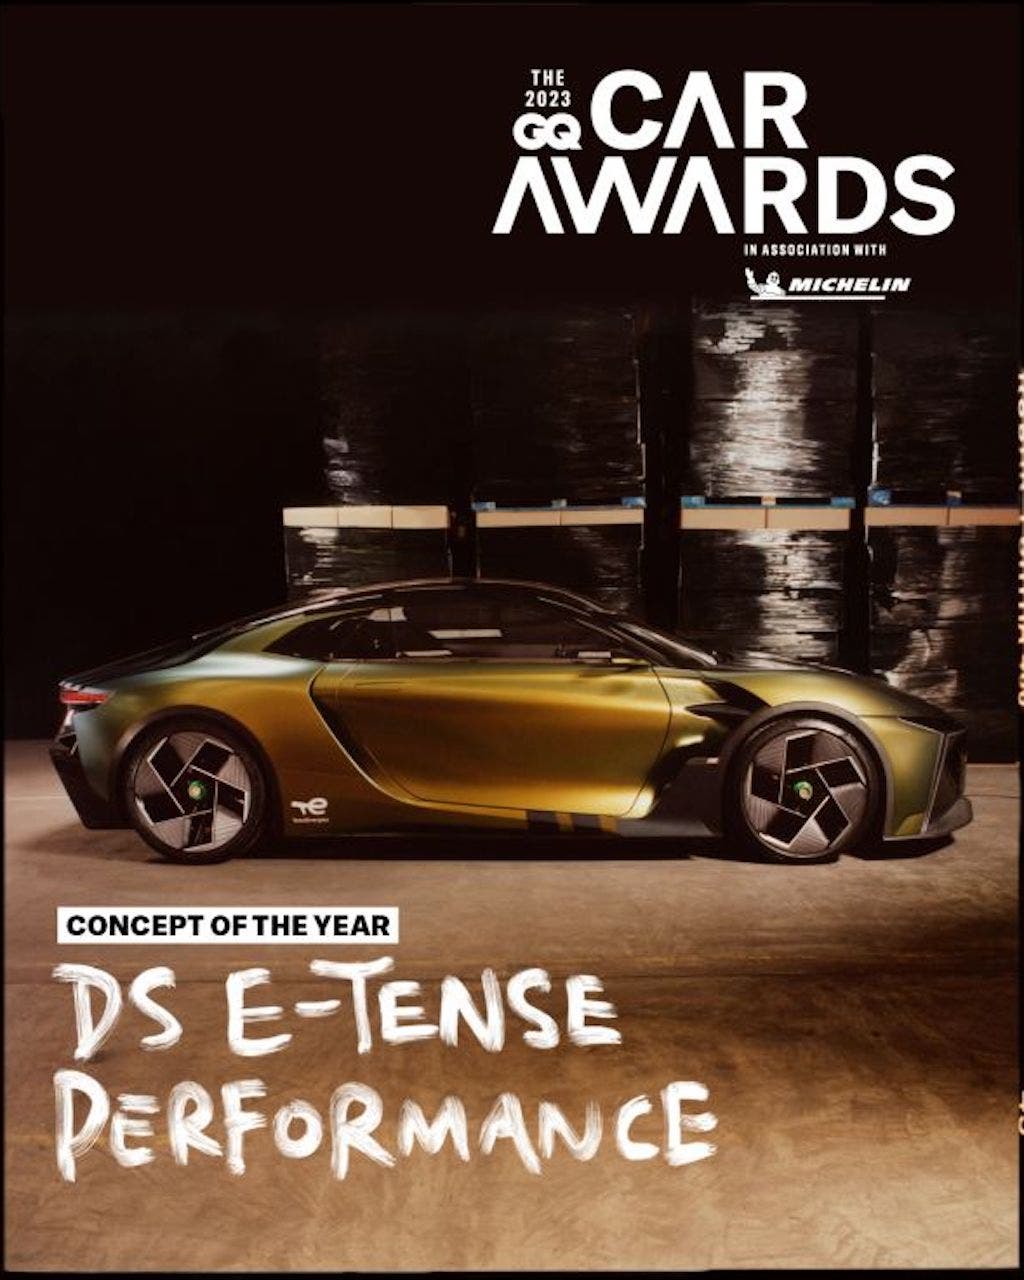 DS E-Tense Performance Concept of the Year GQ Car Awards 2023